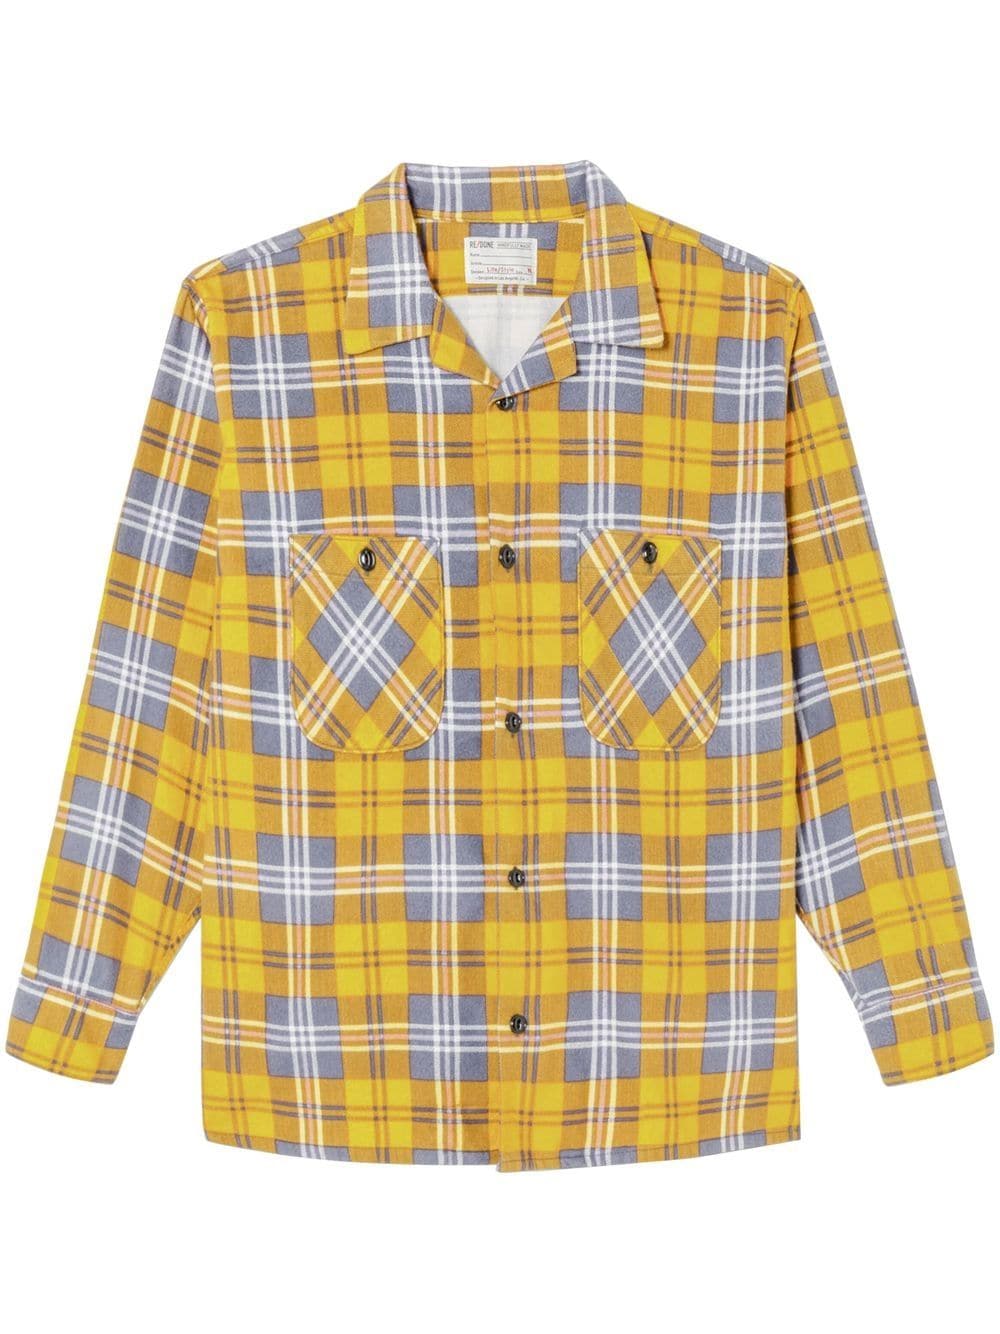 RE/DONE long sleeves shirt - Yellow von RE/DONE